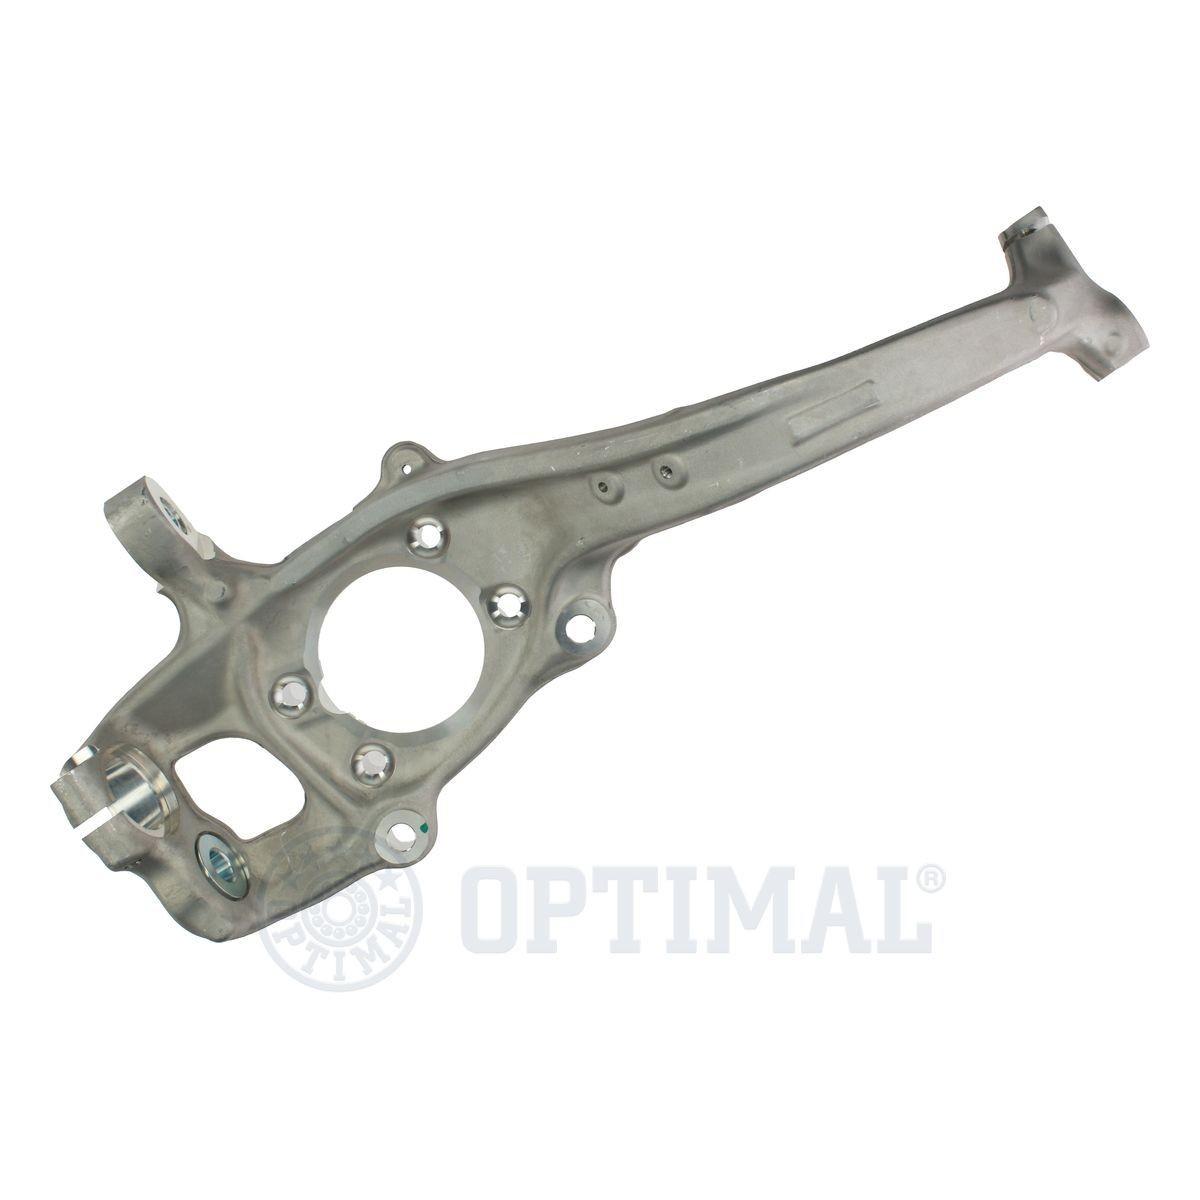 Original KN-100550-00-R OPTIMAL Steering knuckle experience and price